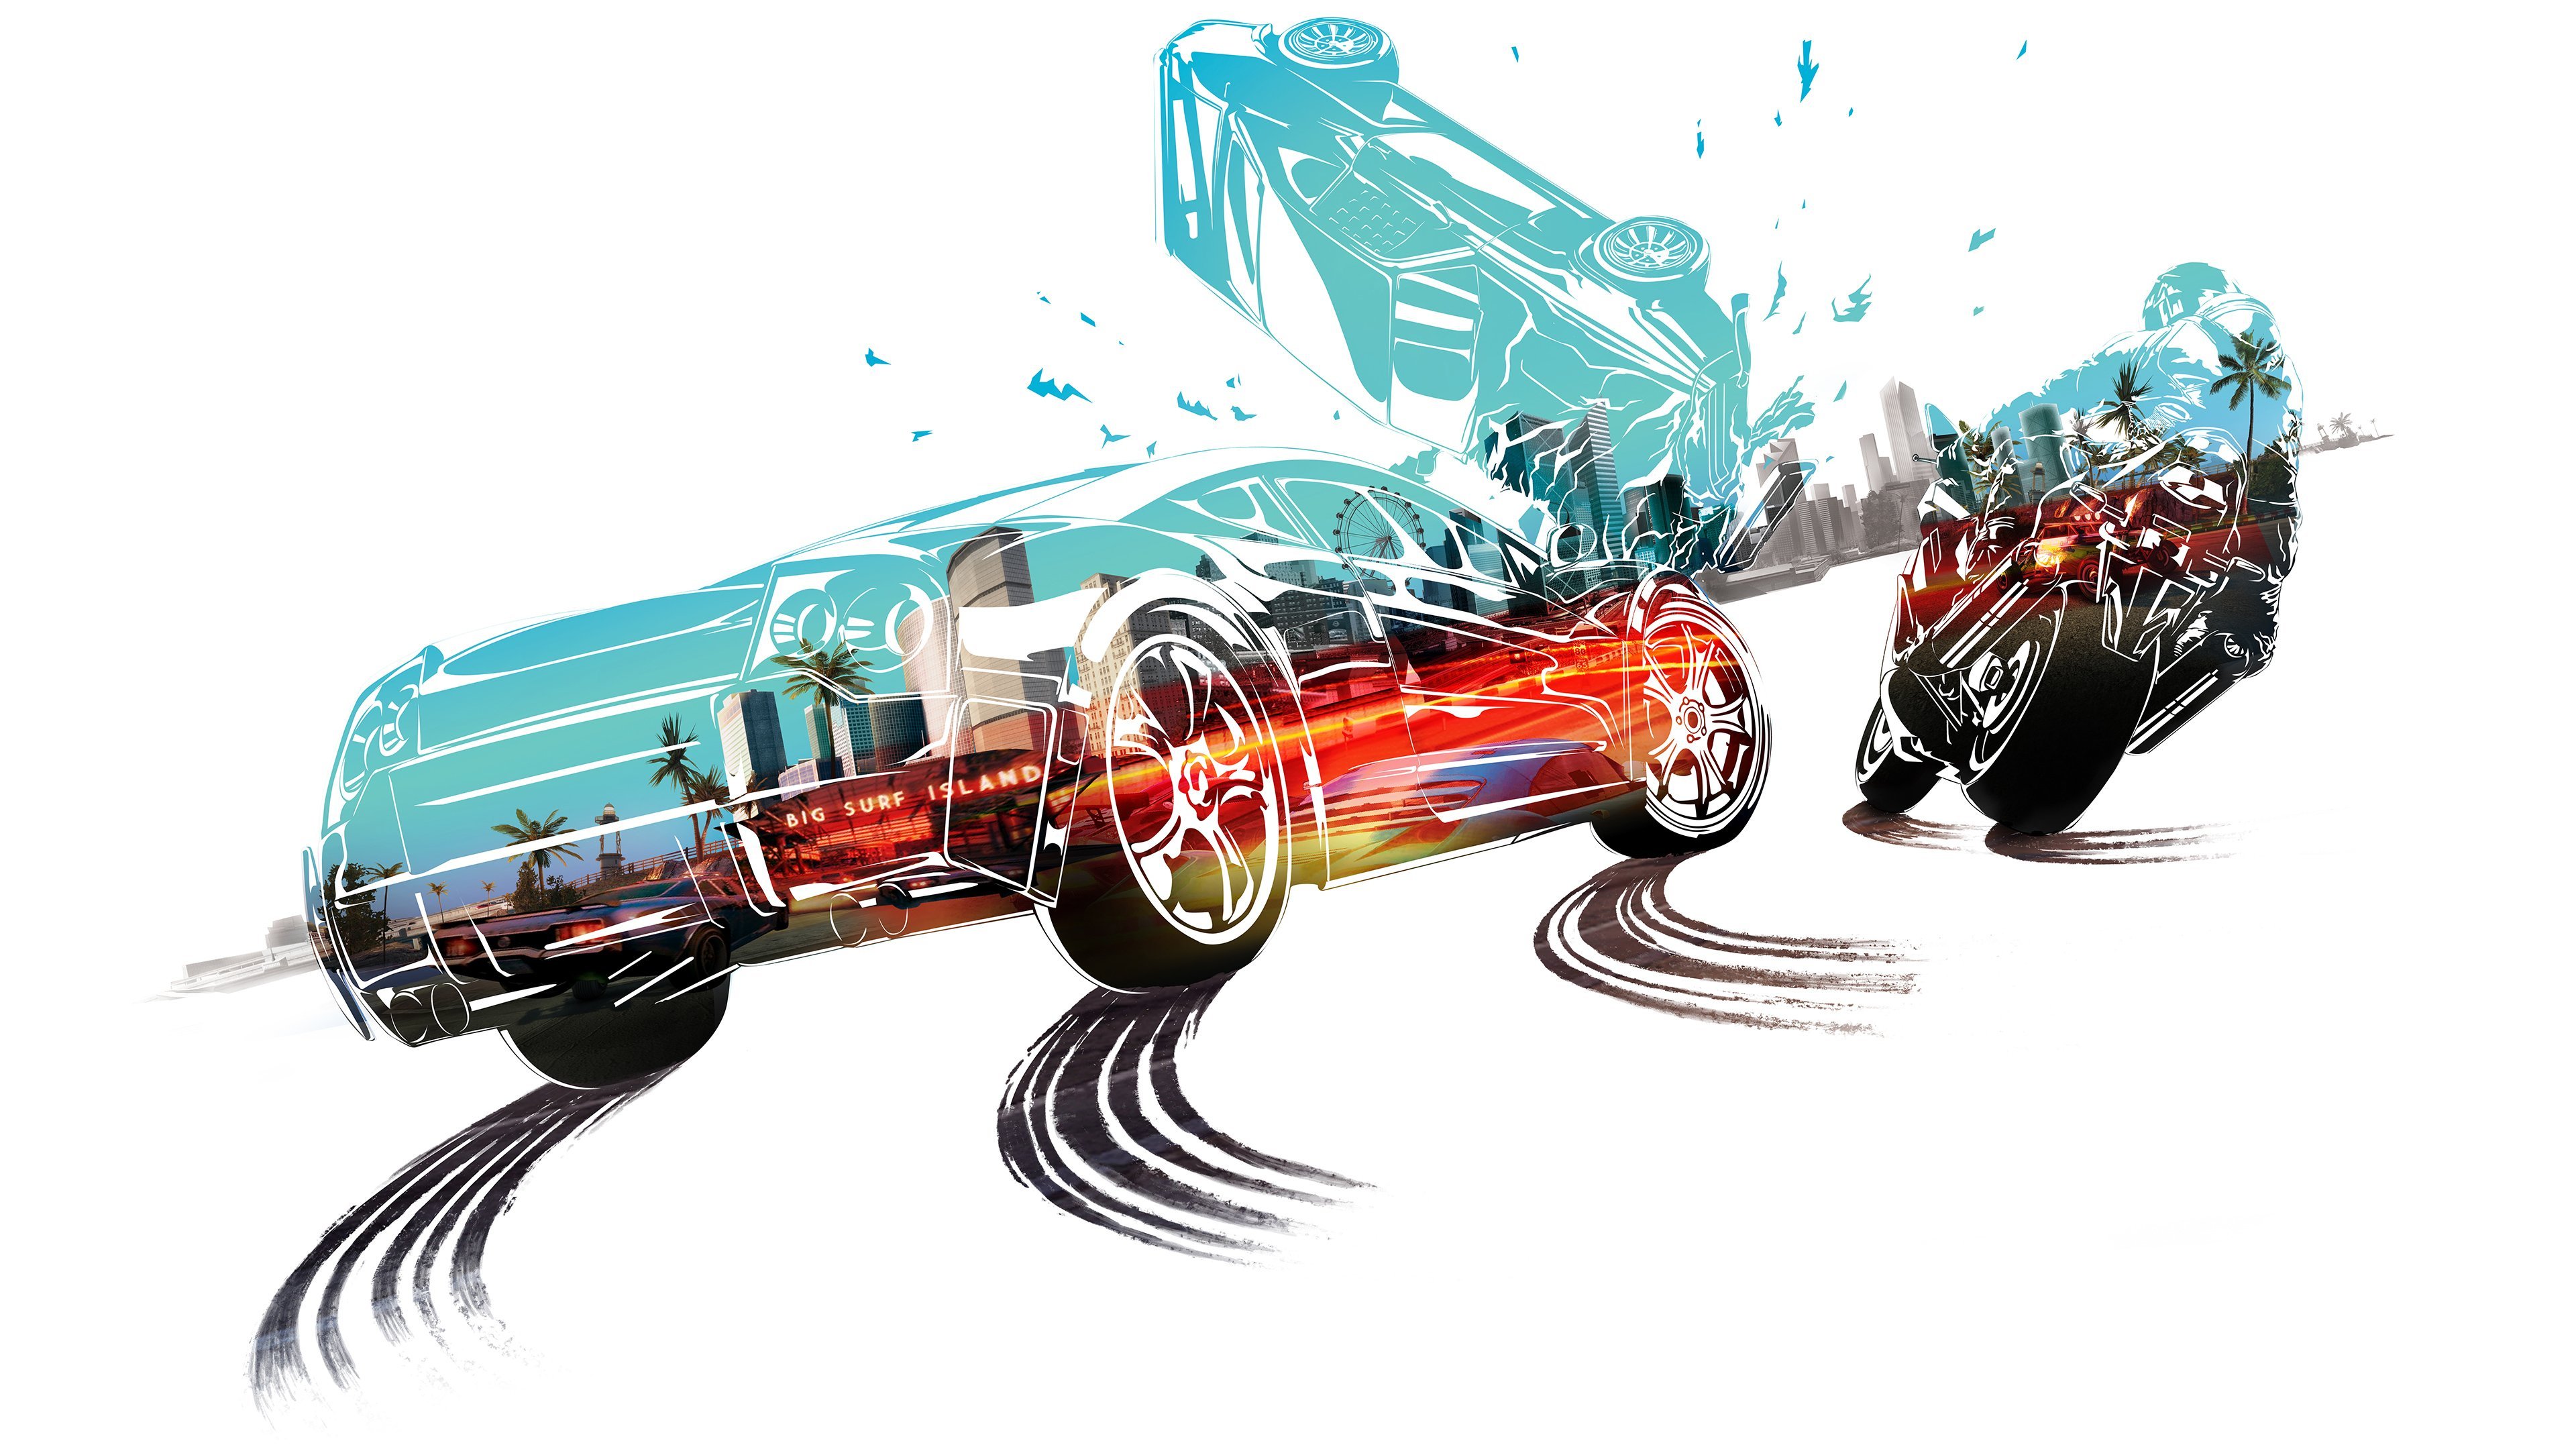 Burnout 4K wallpaper for your desktop or mobile screen free and easy to download